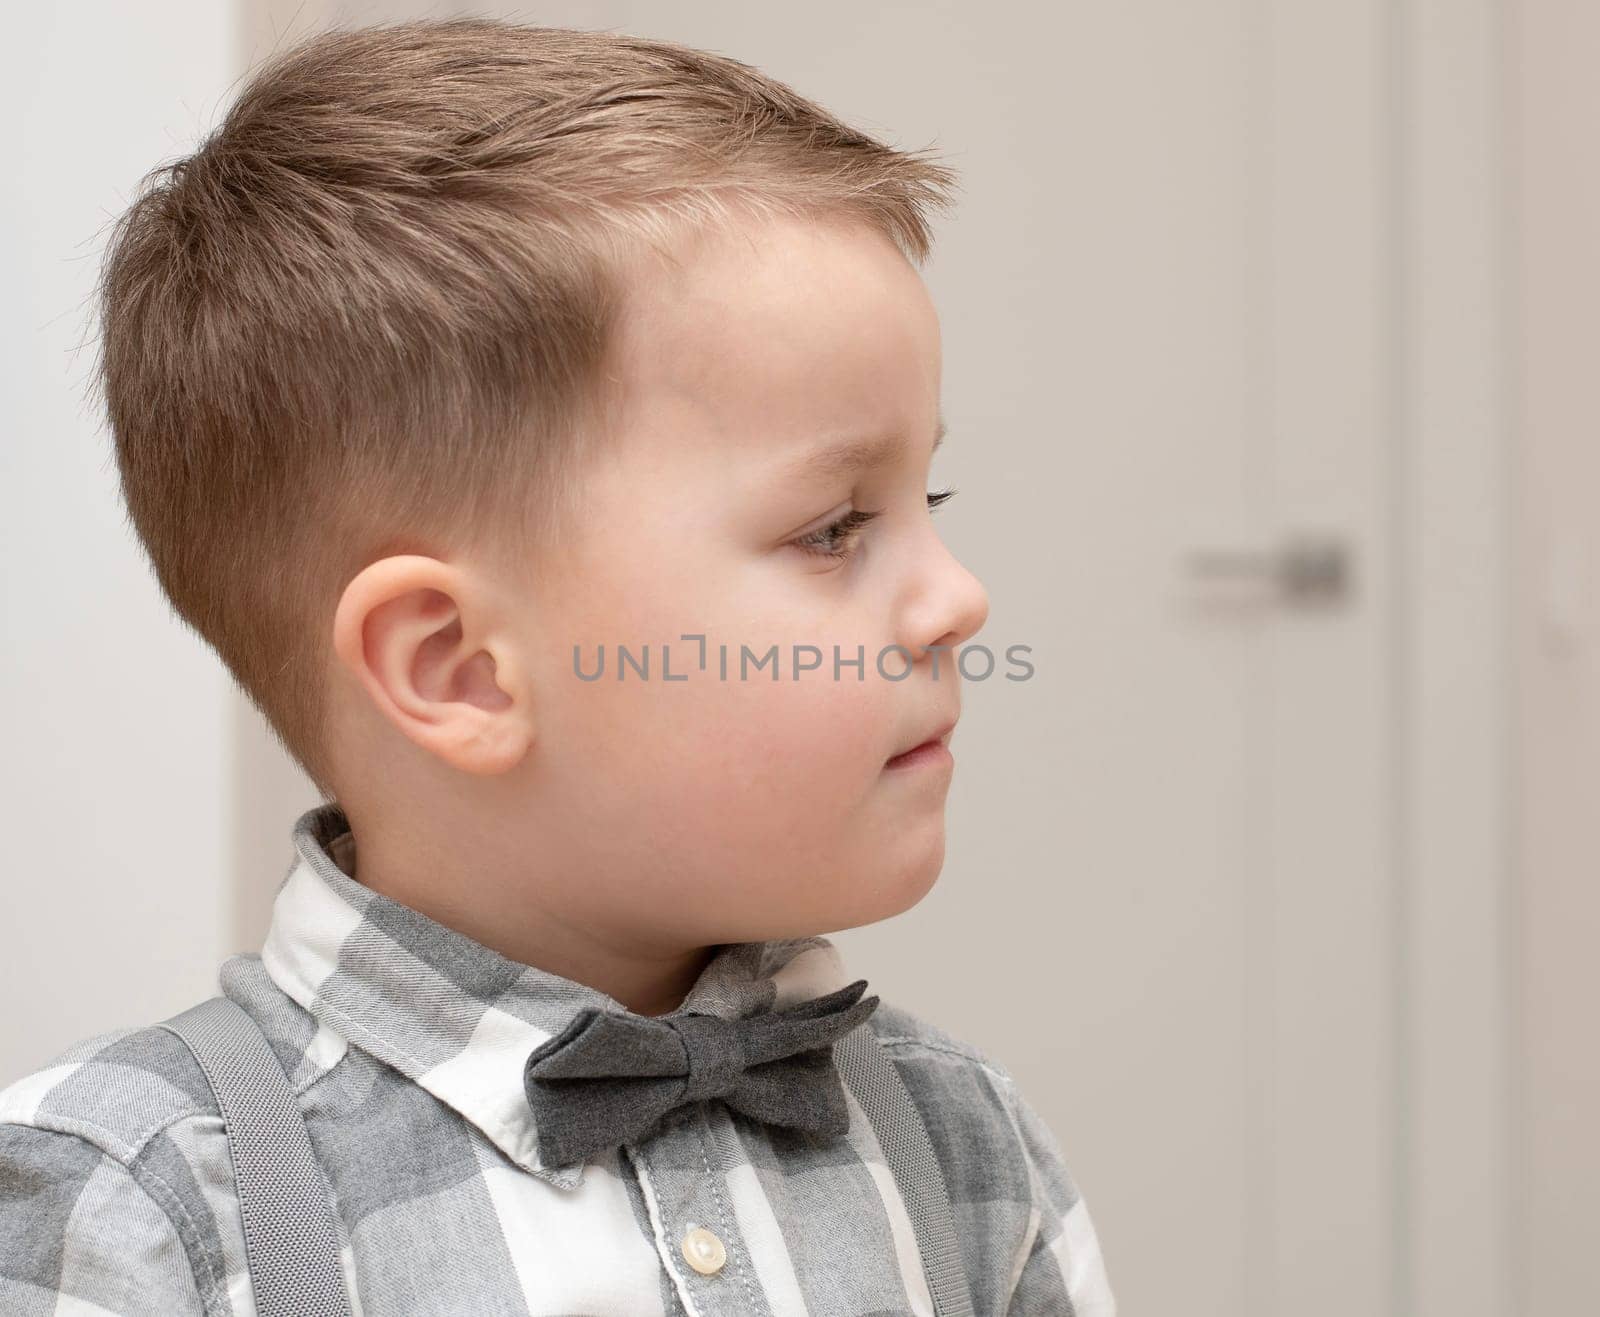 Emotions of calm, thoughtfulness on the child s face. A small handsome boy of 4 years old in a shirt with a bow tie shows a mime with a facial expression. Close-up. portrait